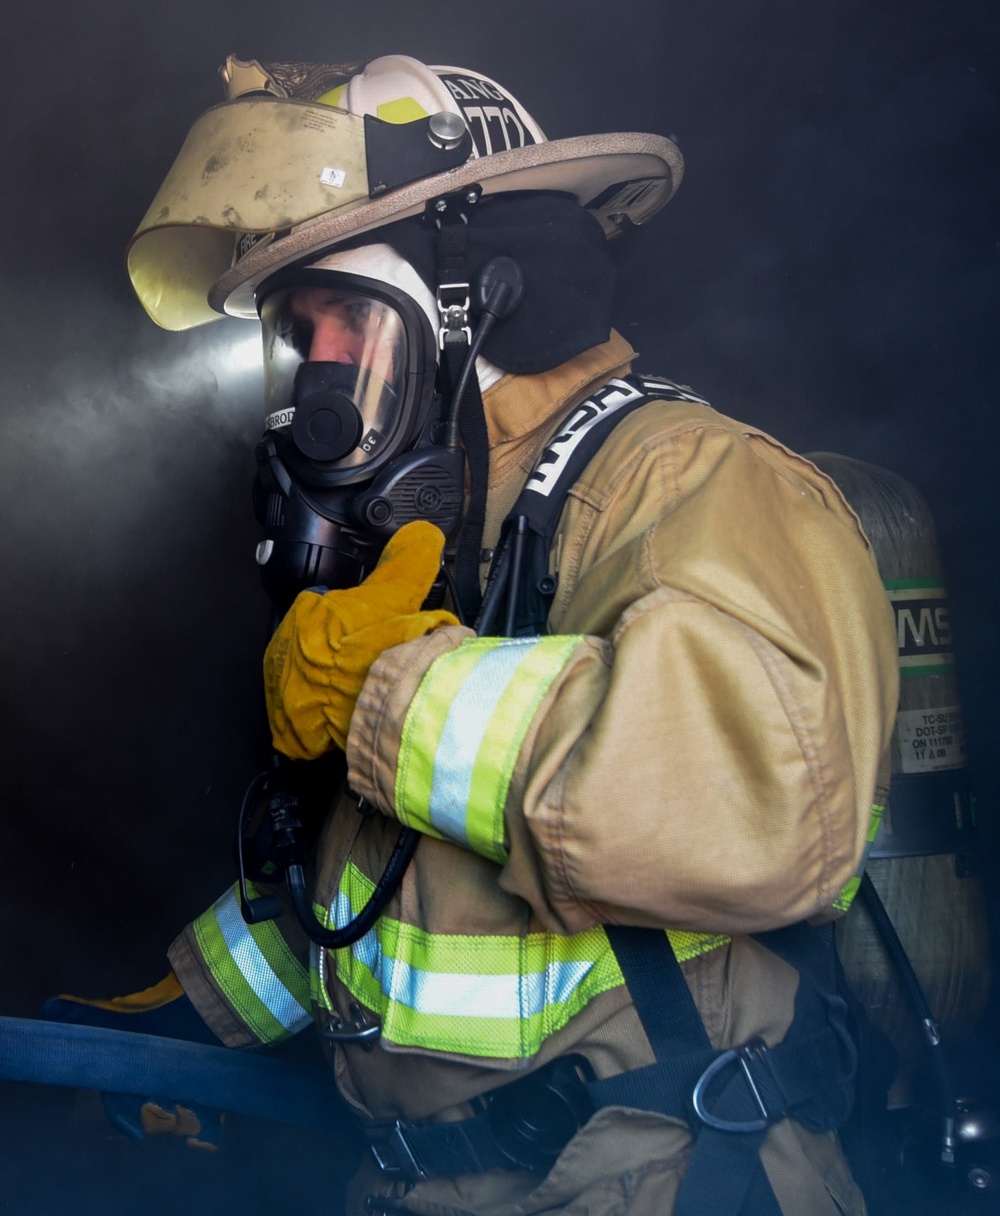 Tucson Fire Fighting Exercise